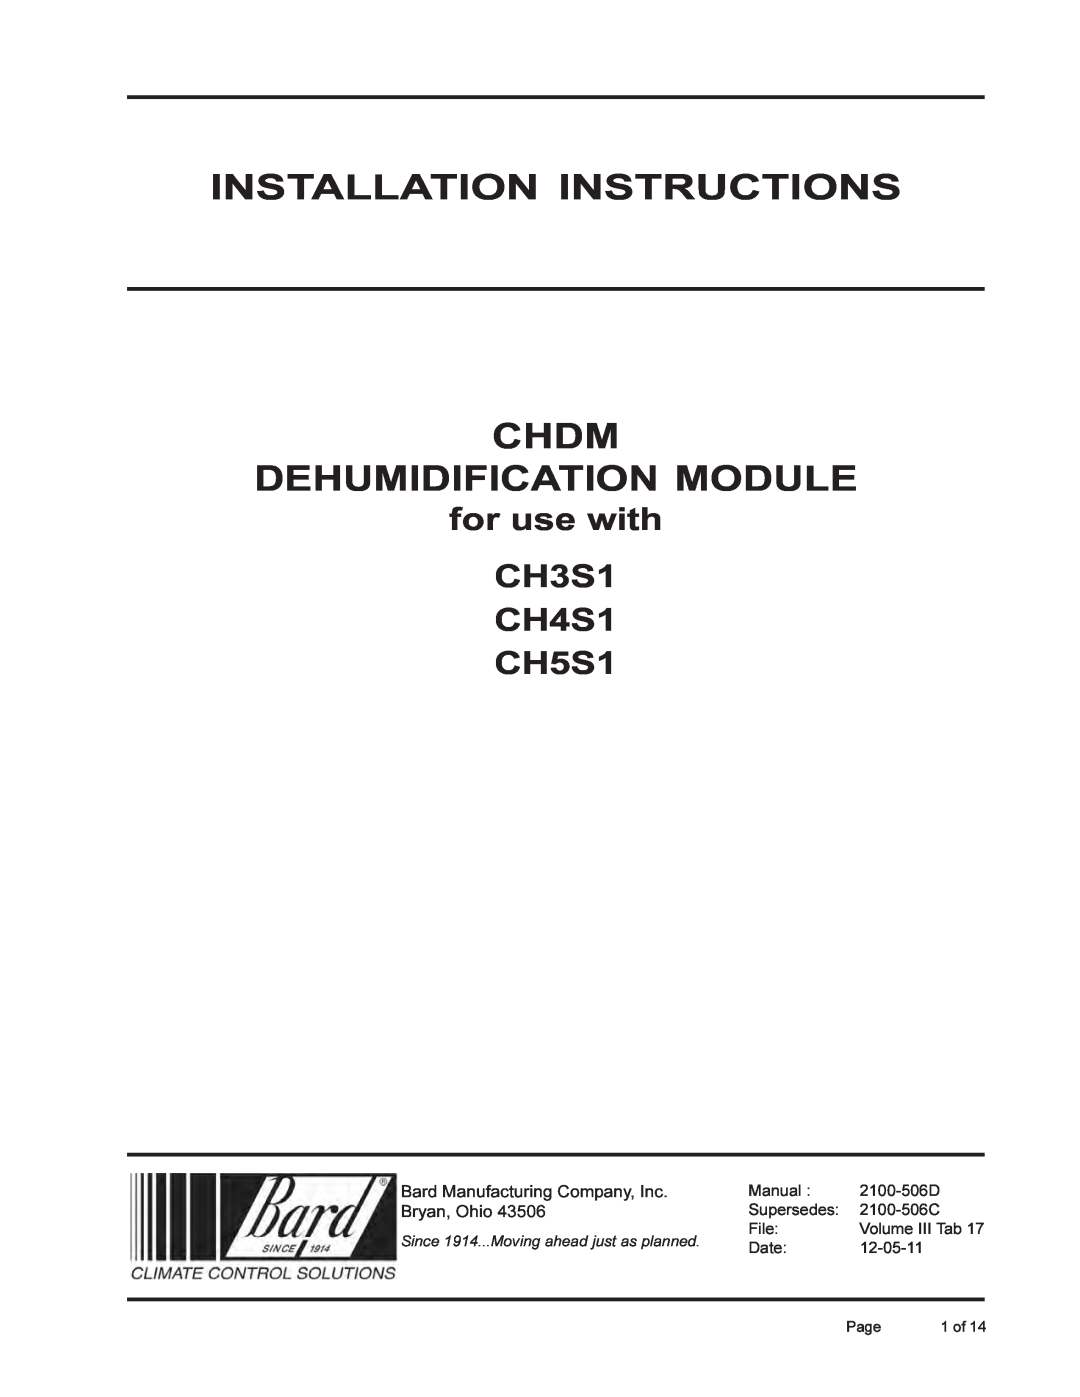 Bard installation instructions for use with CH3S1 CH4S1 CH5S1, Installation Instructions Chdm, Dehumidification Module 